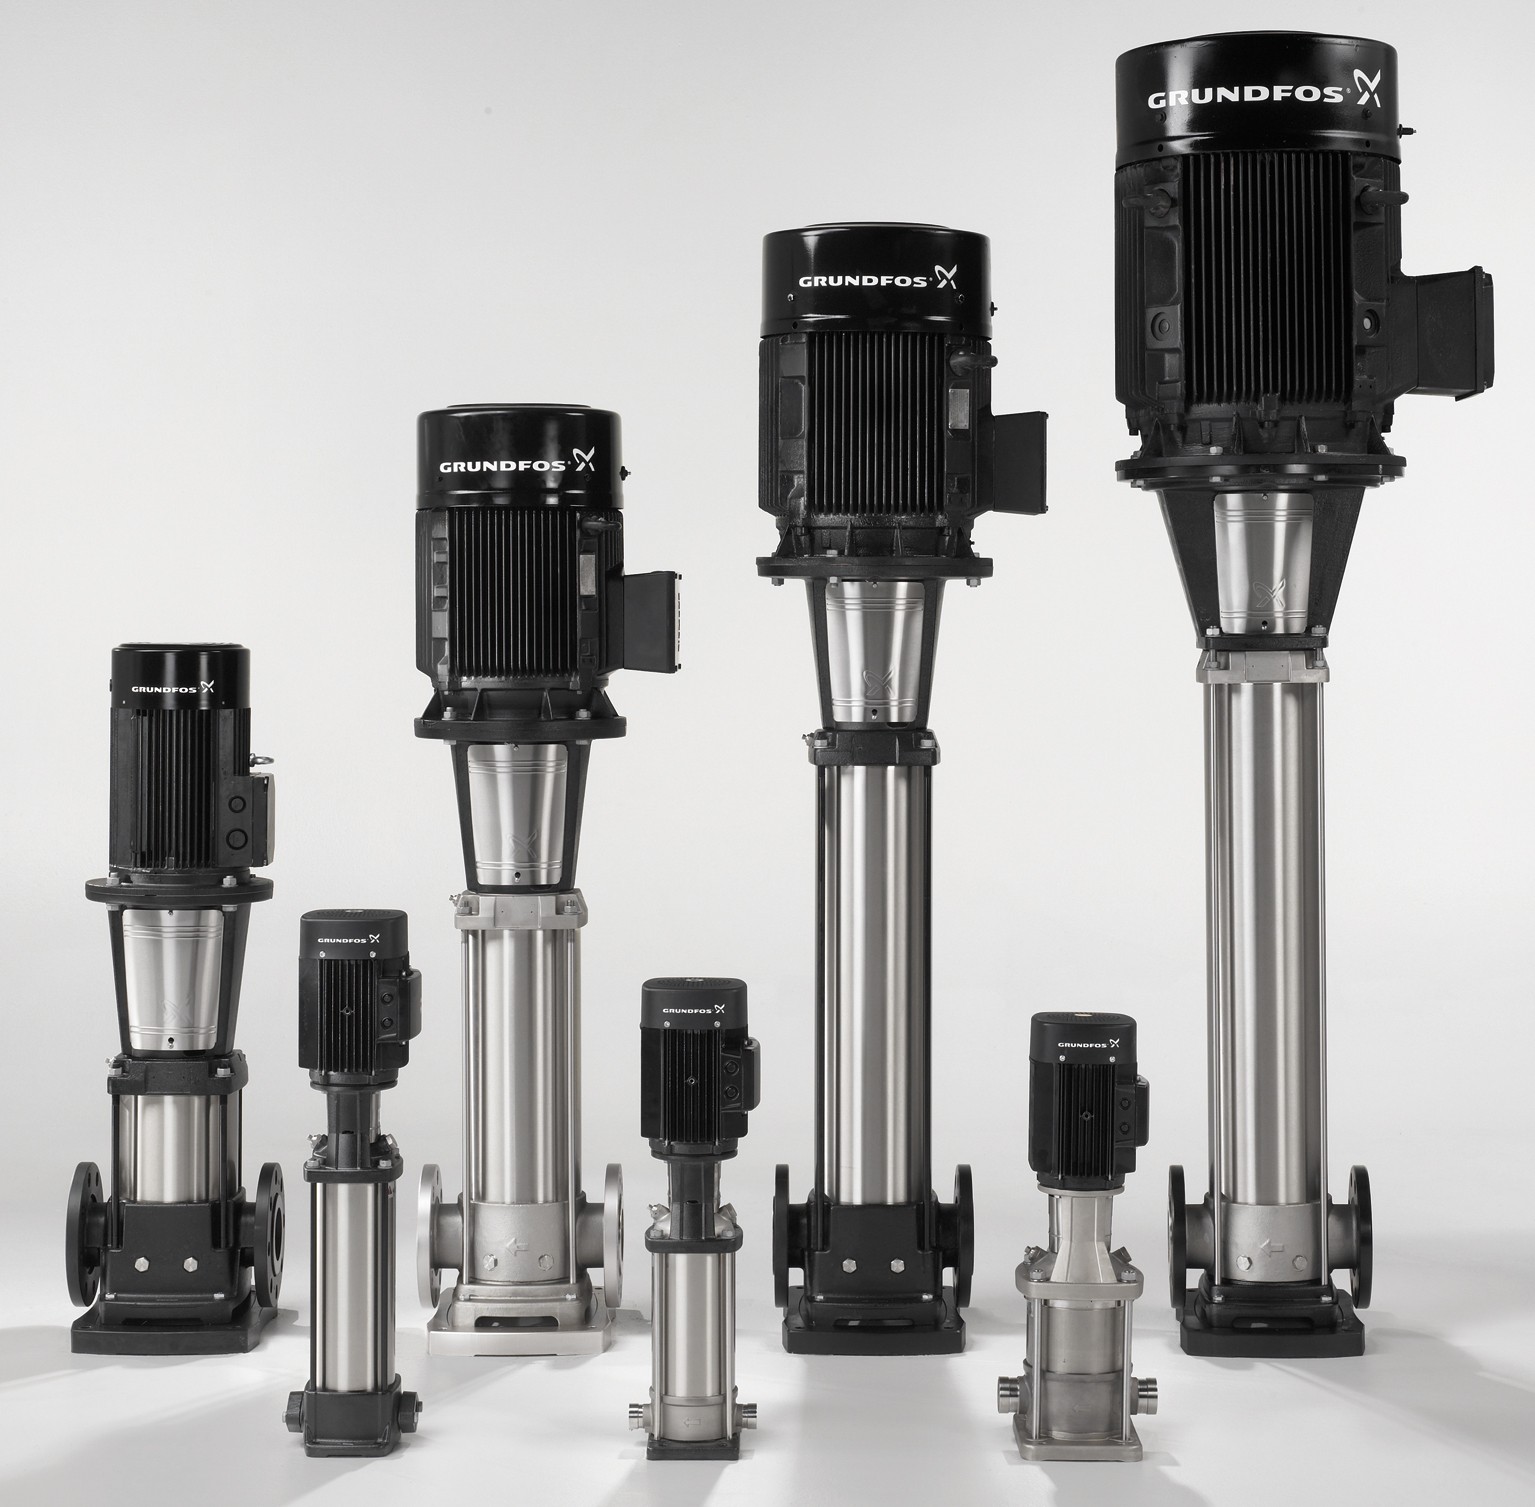 A Complete Water grundfos pumps Guide - AU